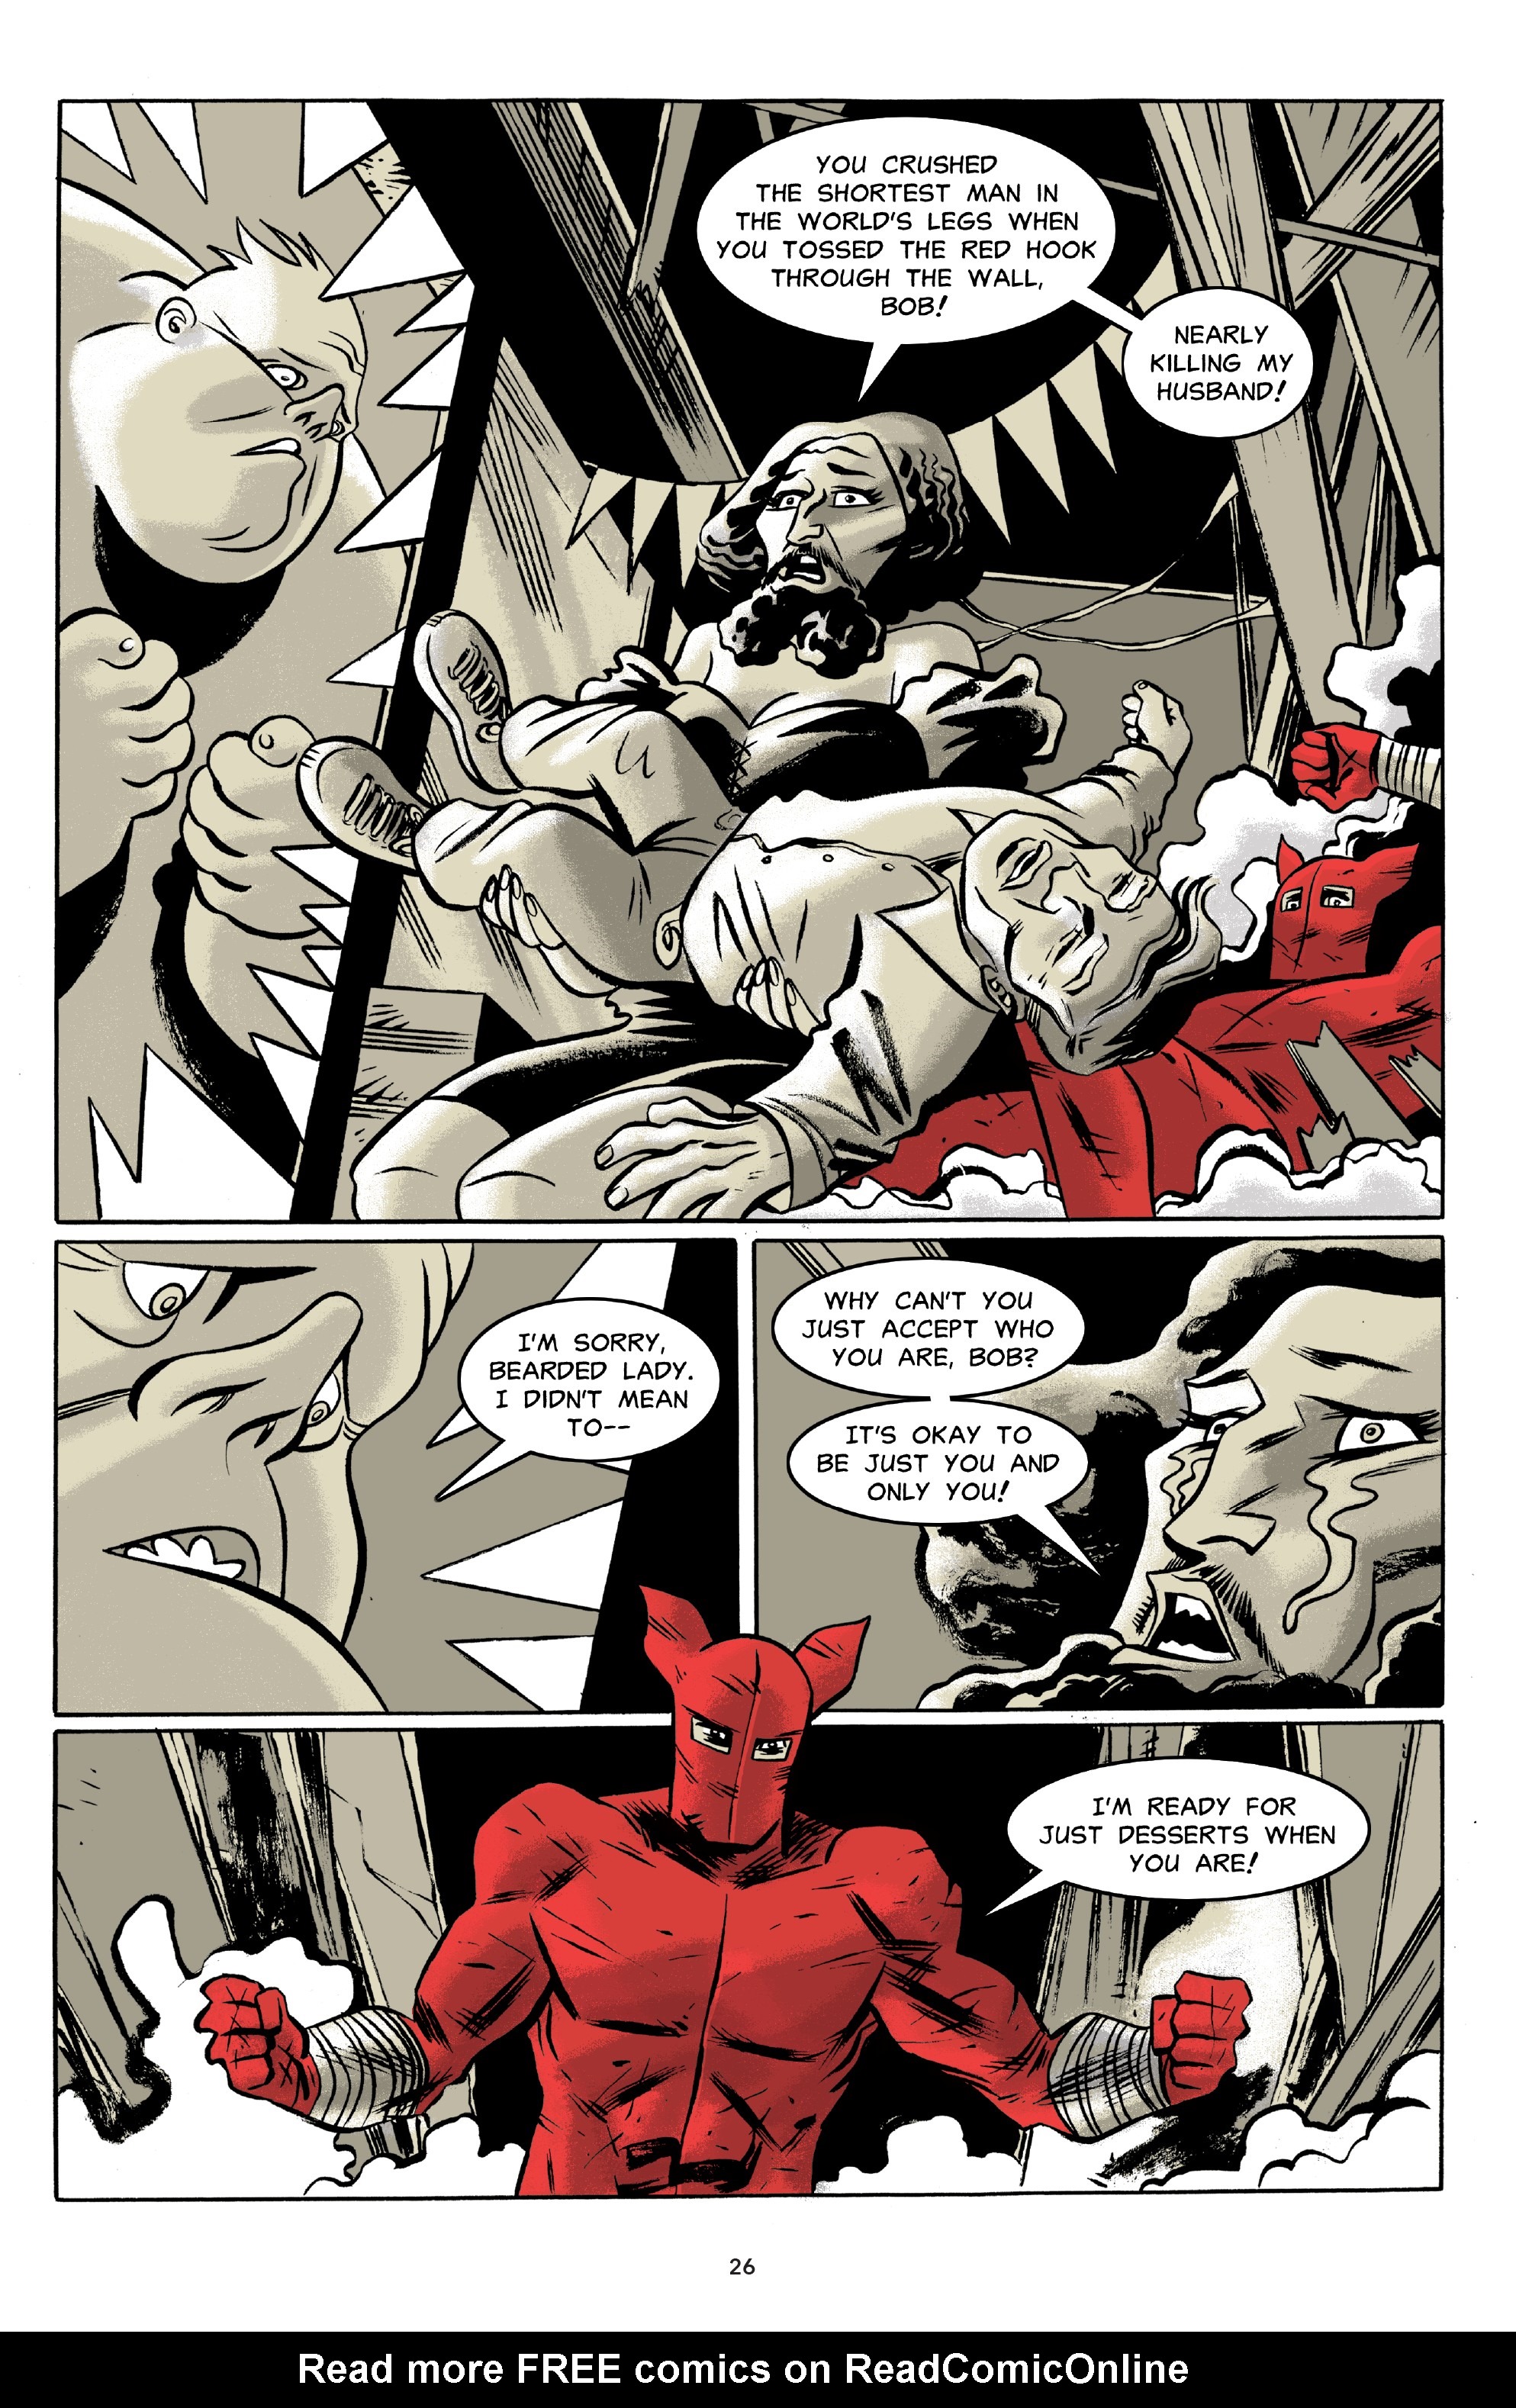 Read online The Red Hook comic -  Issue # TPB (Part 1) - 26